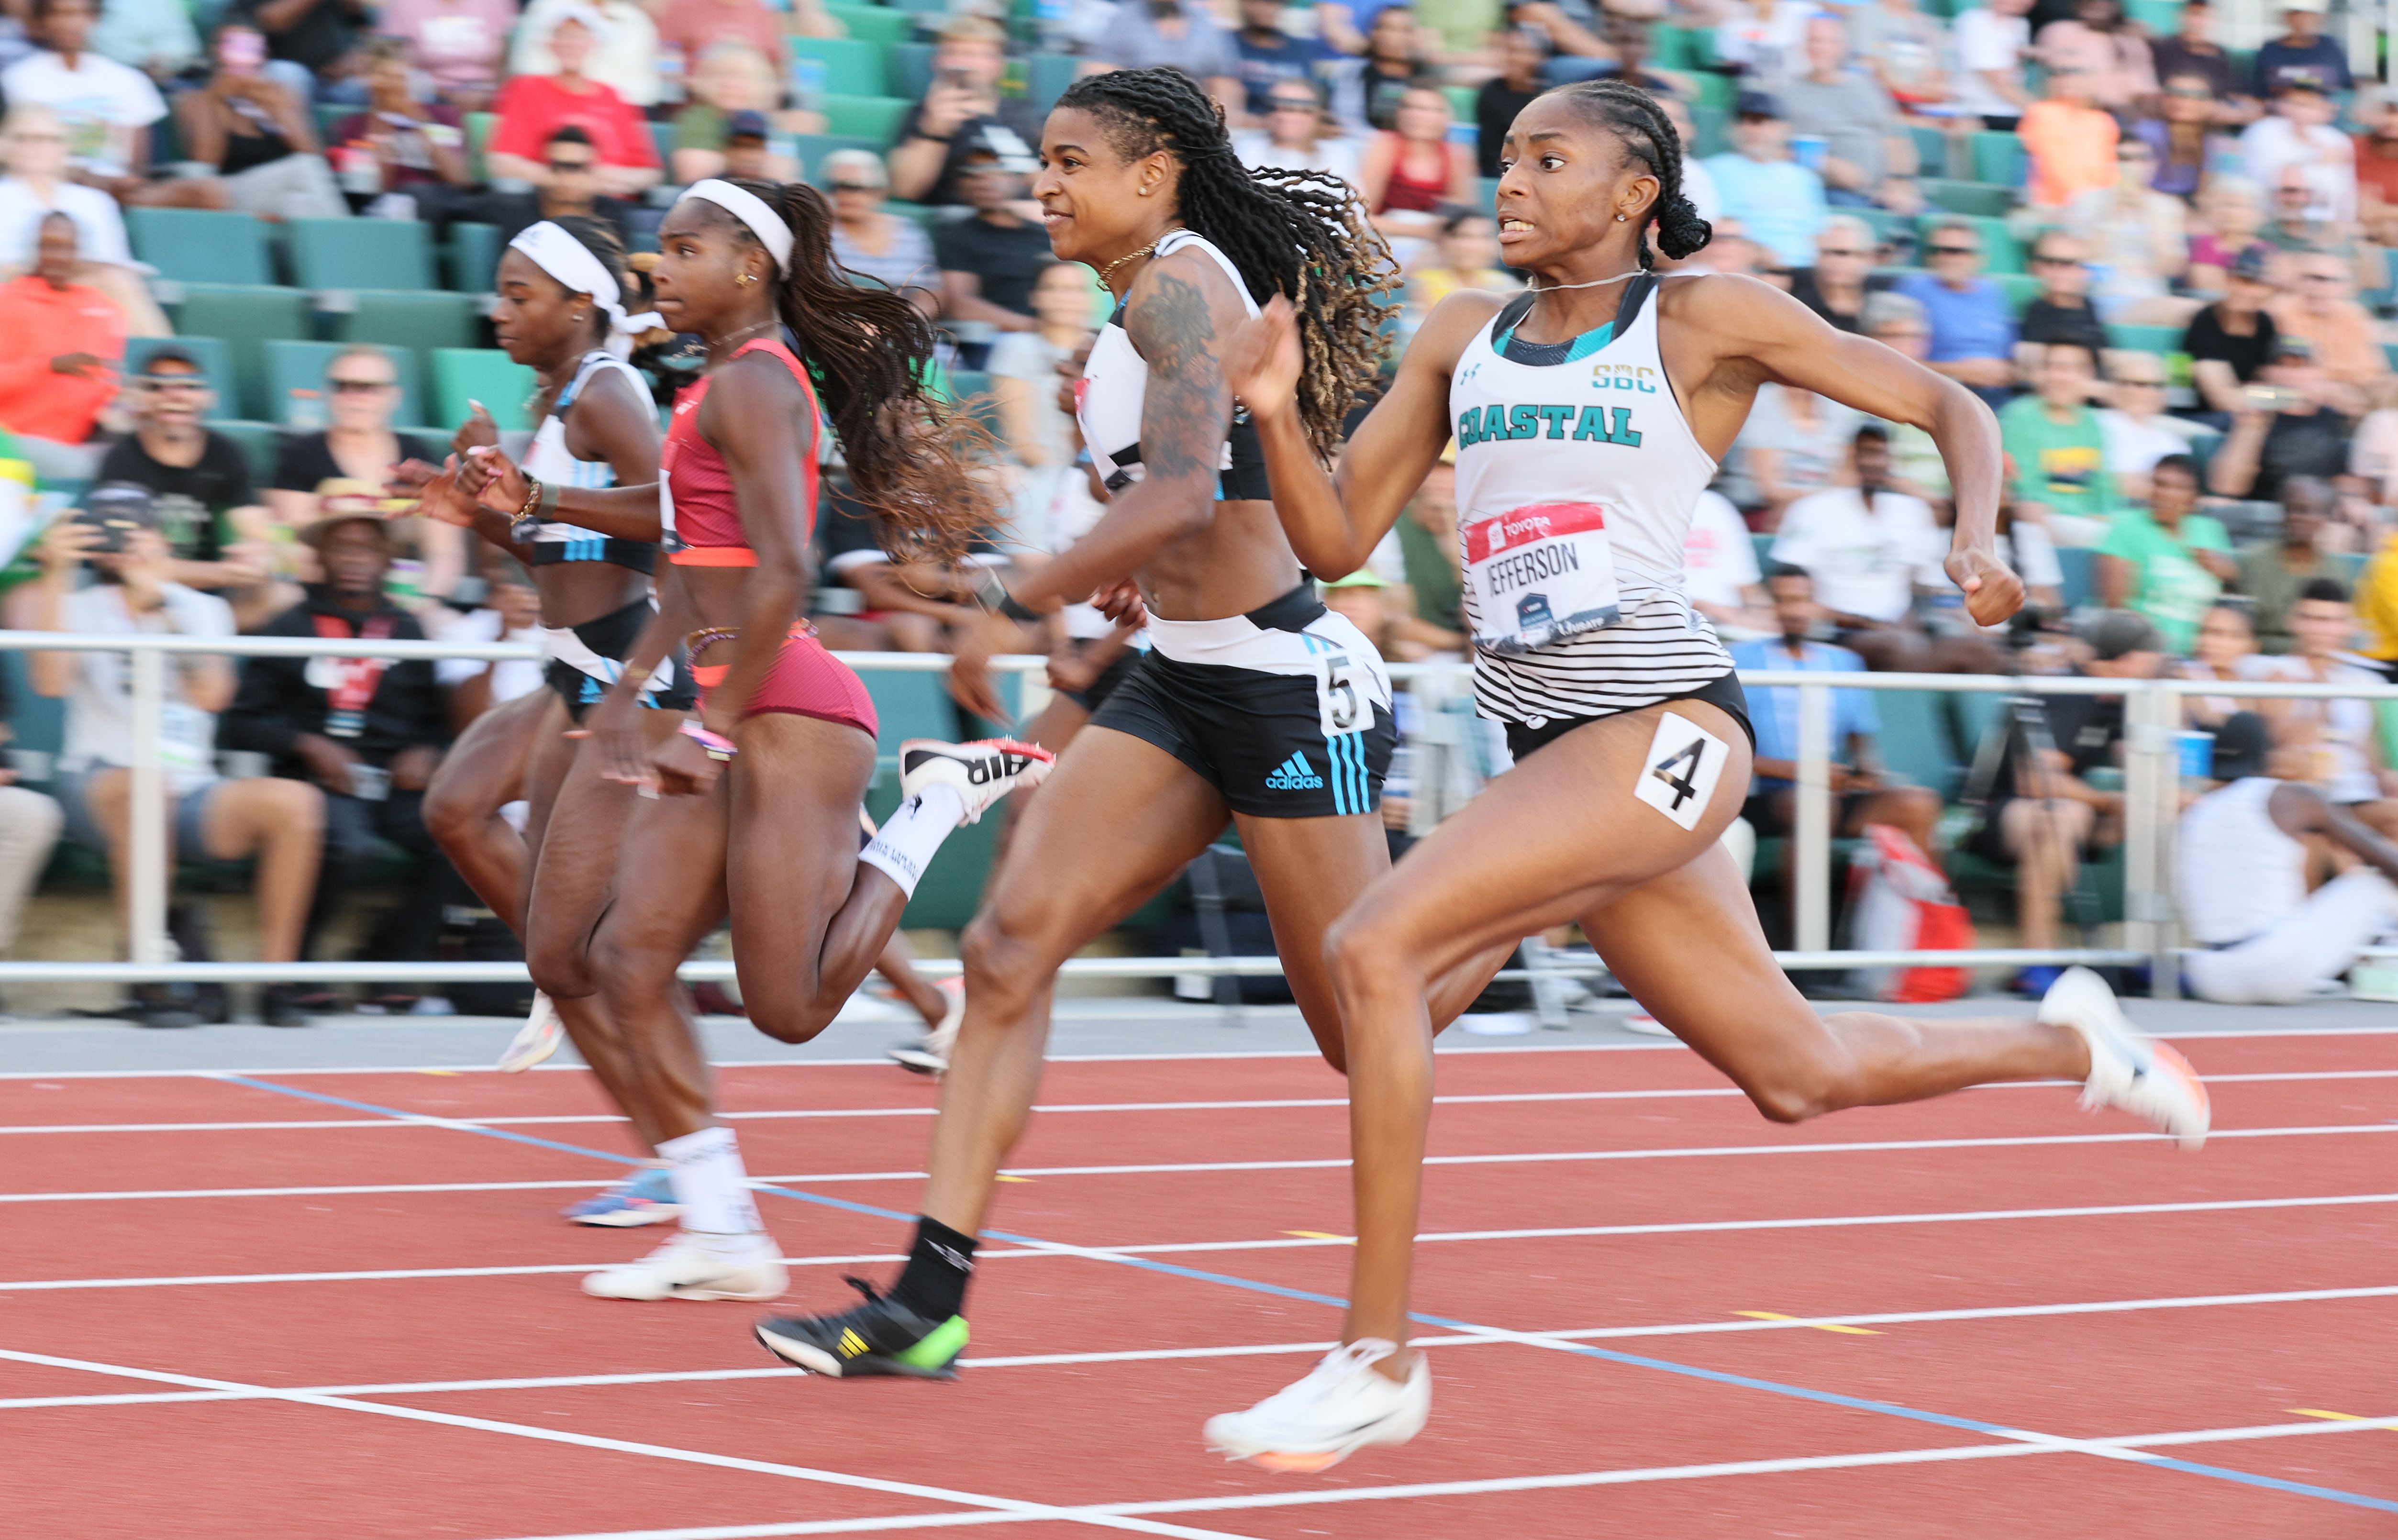 Melissa Jefferson (right) wins the 100m at the US Championships